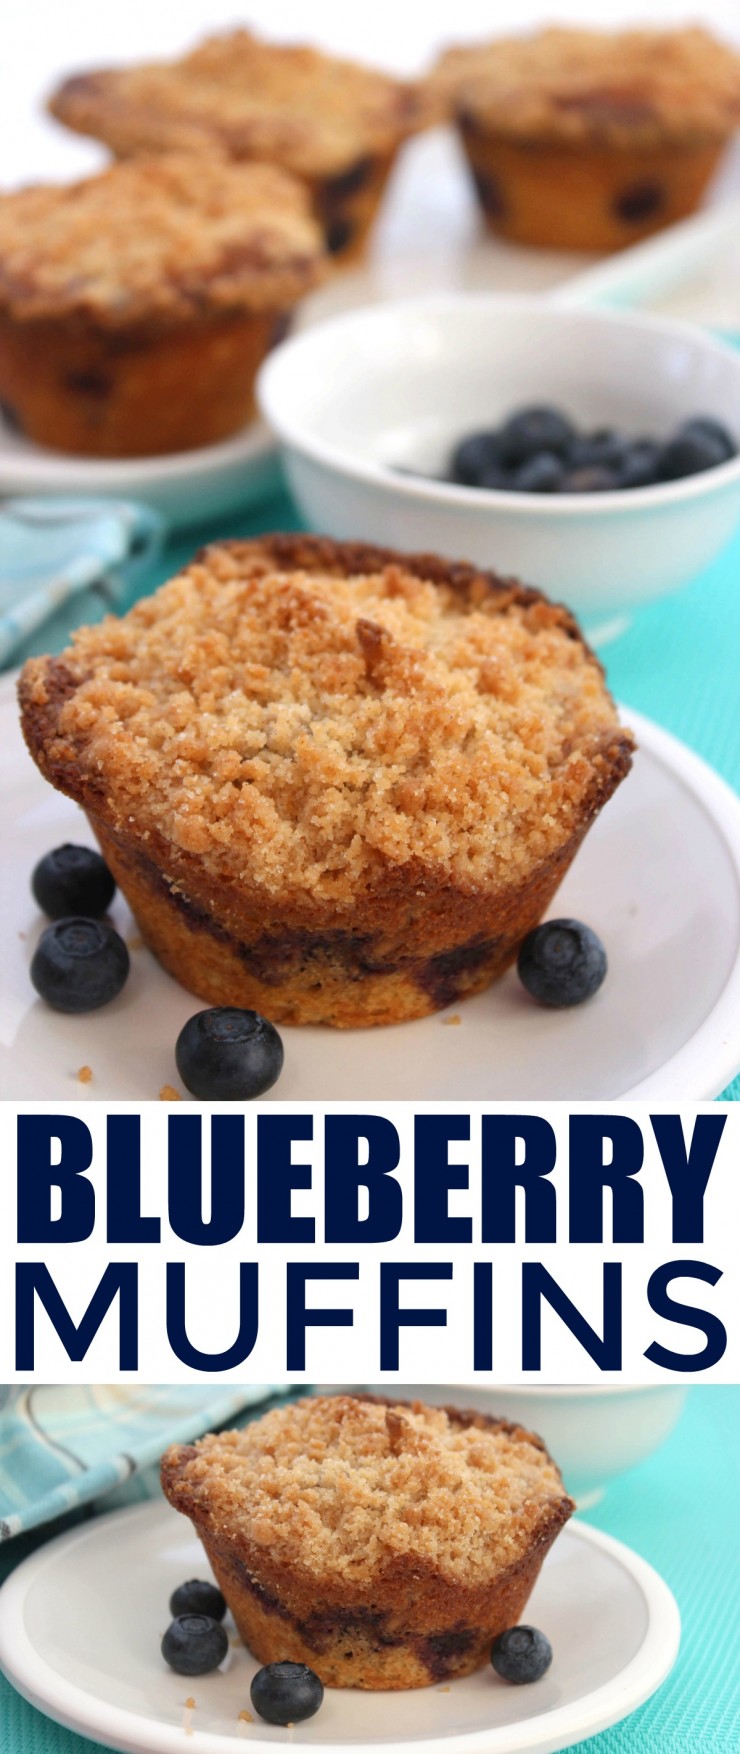 These classic blueberry muffins are a favourite year round. Enjoy with a cup of hot coffee - just sit back and relax.